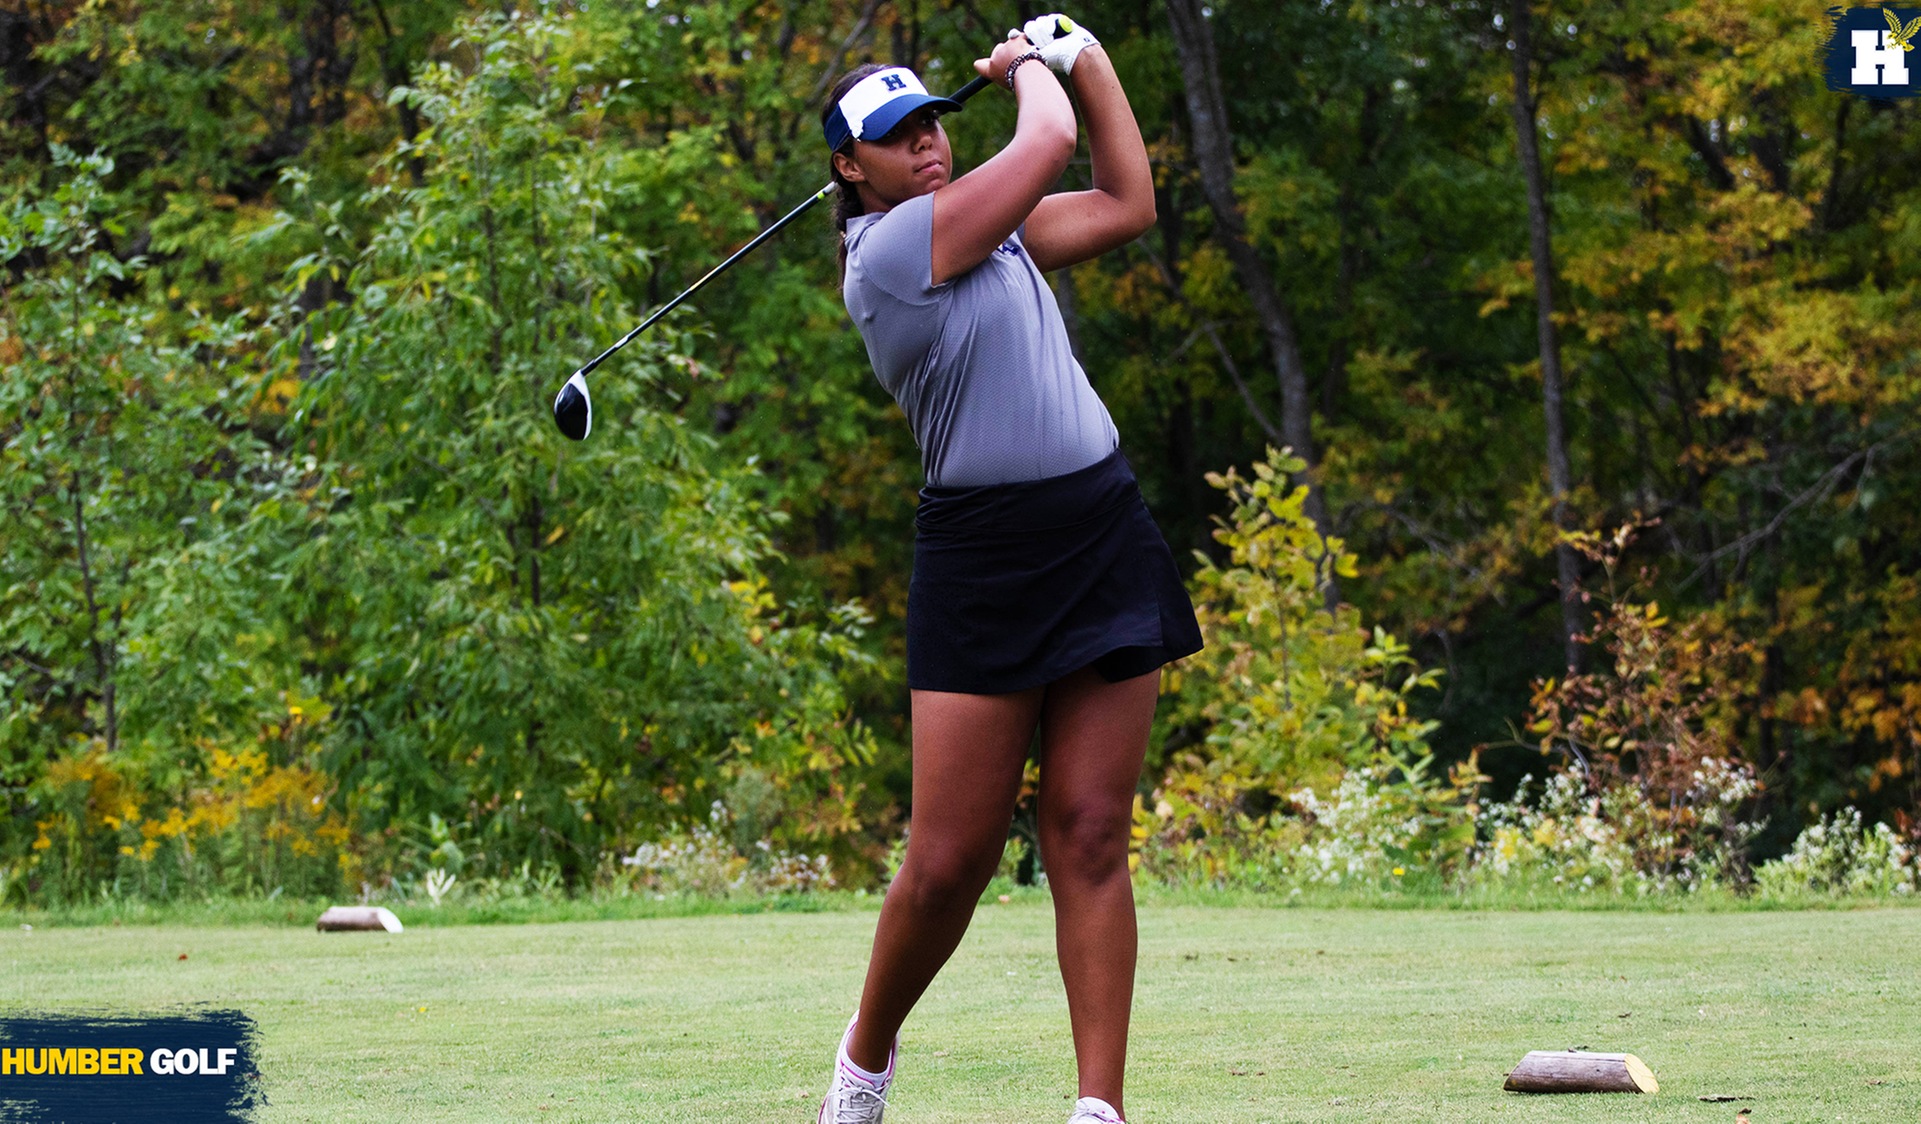 OCAA CHAMPIONSHIP UPDATE: No. 5 WOMEN'S GOLF IN SECOND AFTER FIRST ROUND